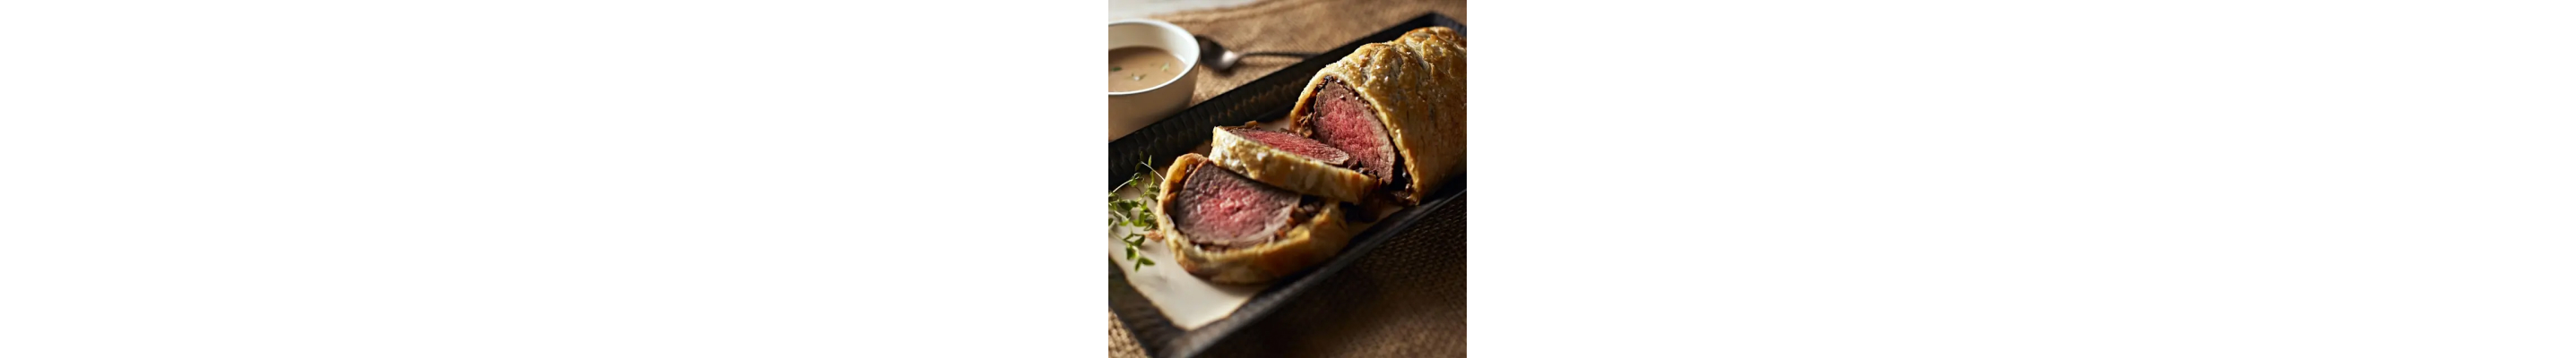 Beef wellington with a side of cognac sauce